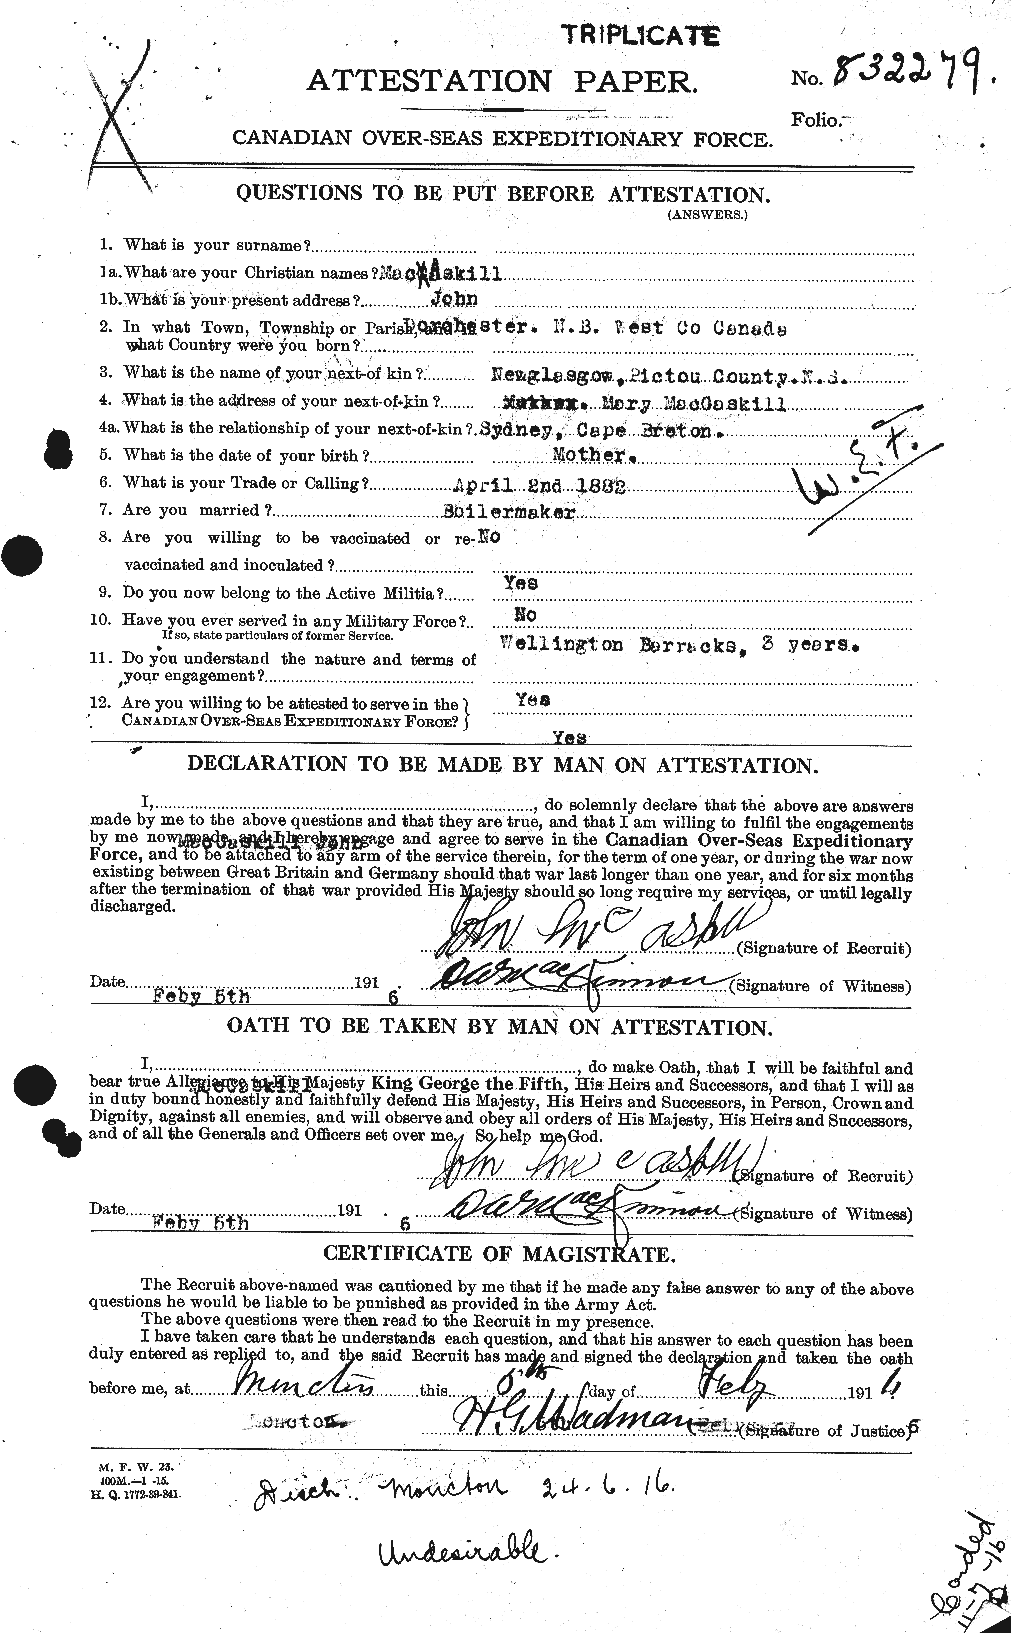 Personnel Records of the First World War - CEF 130558a